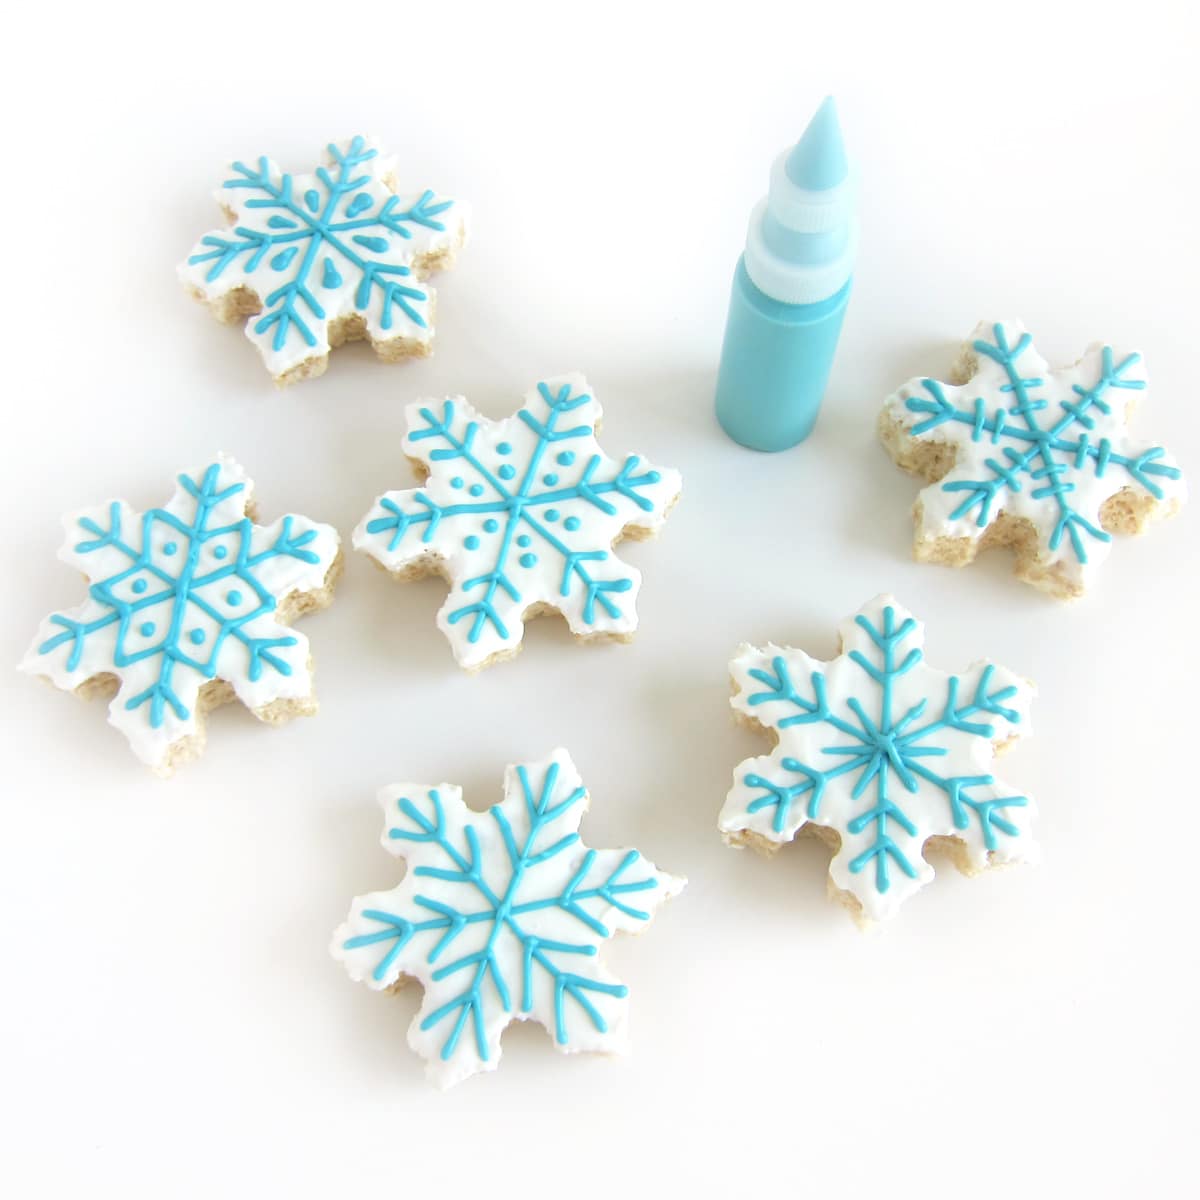 white chocolate covered Rice Krispie Treats decorated with blue candy melts snowflakes.